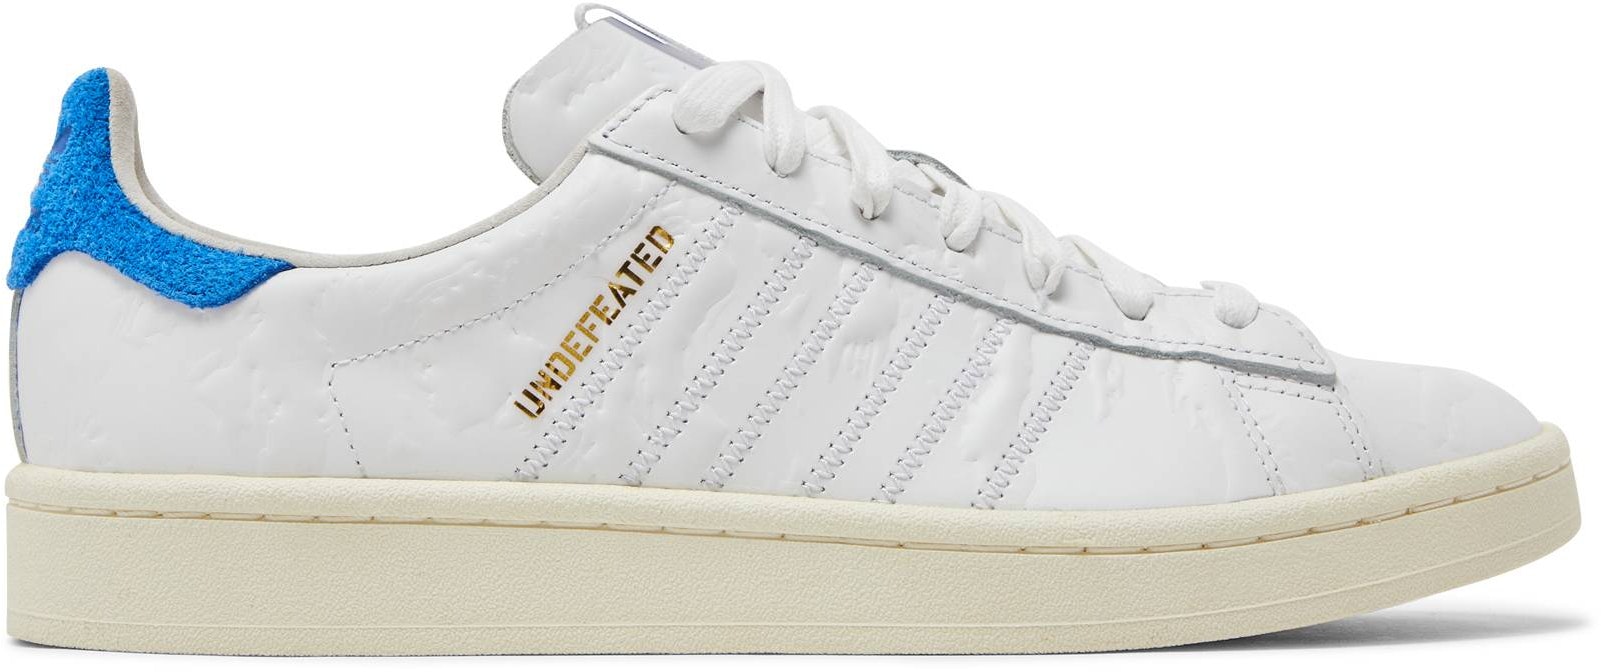 Colette x UNDEFEATED x adidas Campus S.E. 'White Blue' BY2595